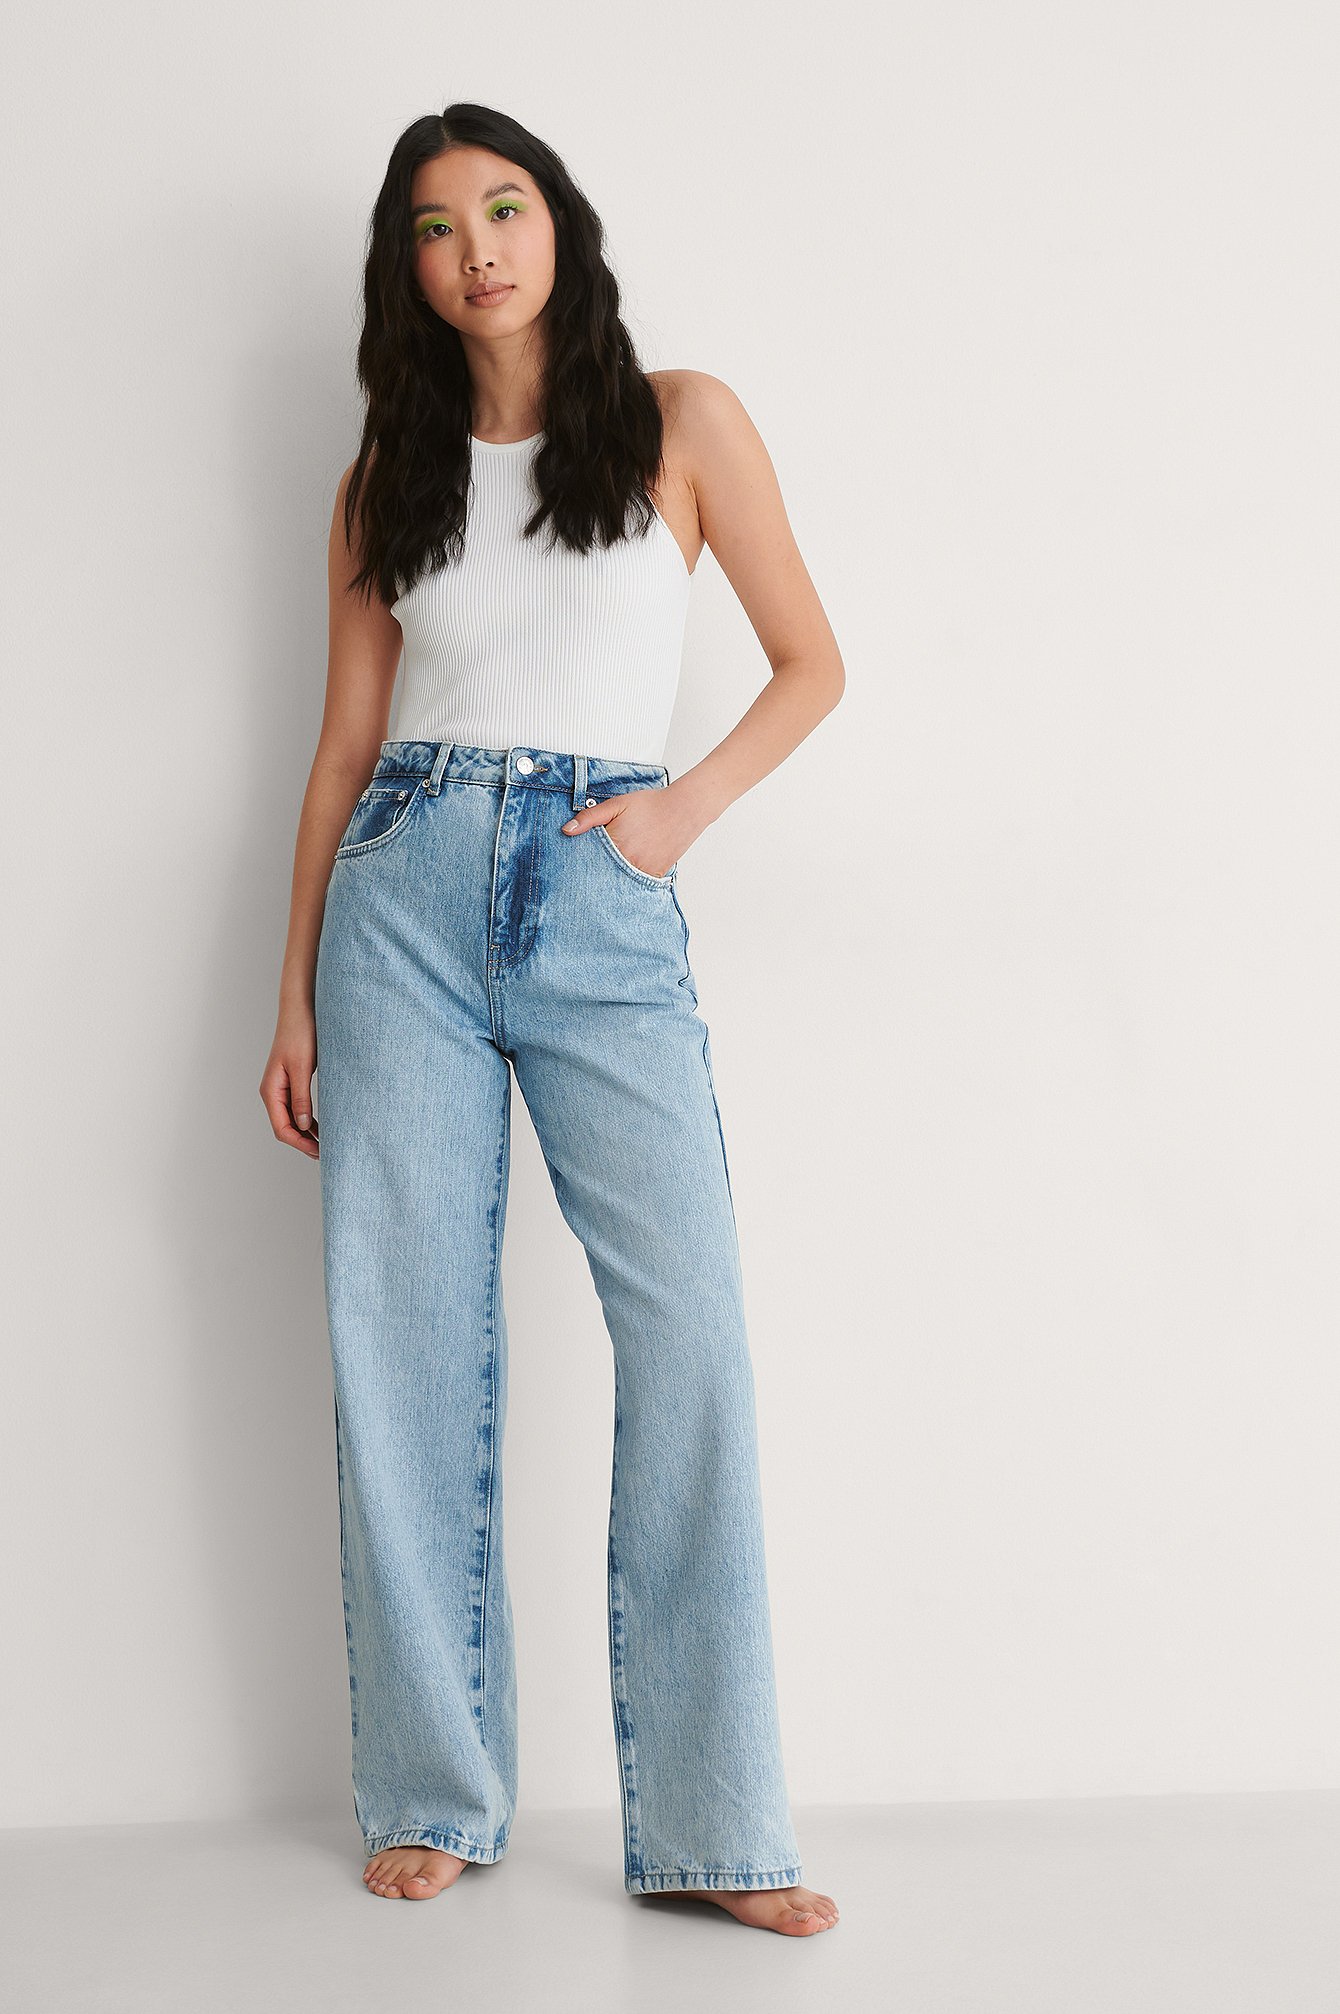 Vintage Look Wide Leg High Waist Jeans Outfit.